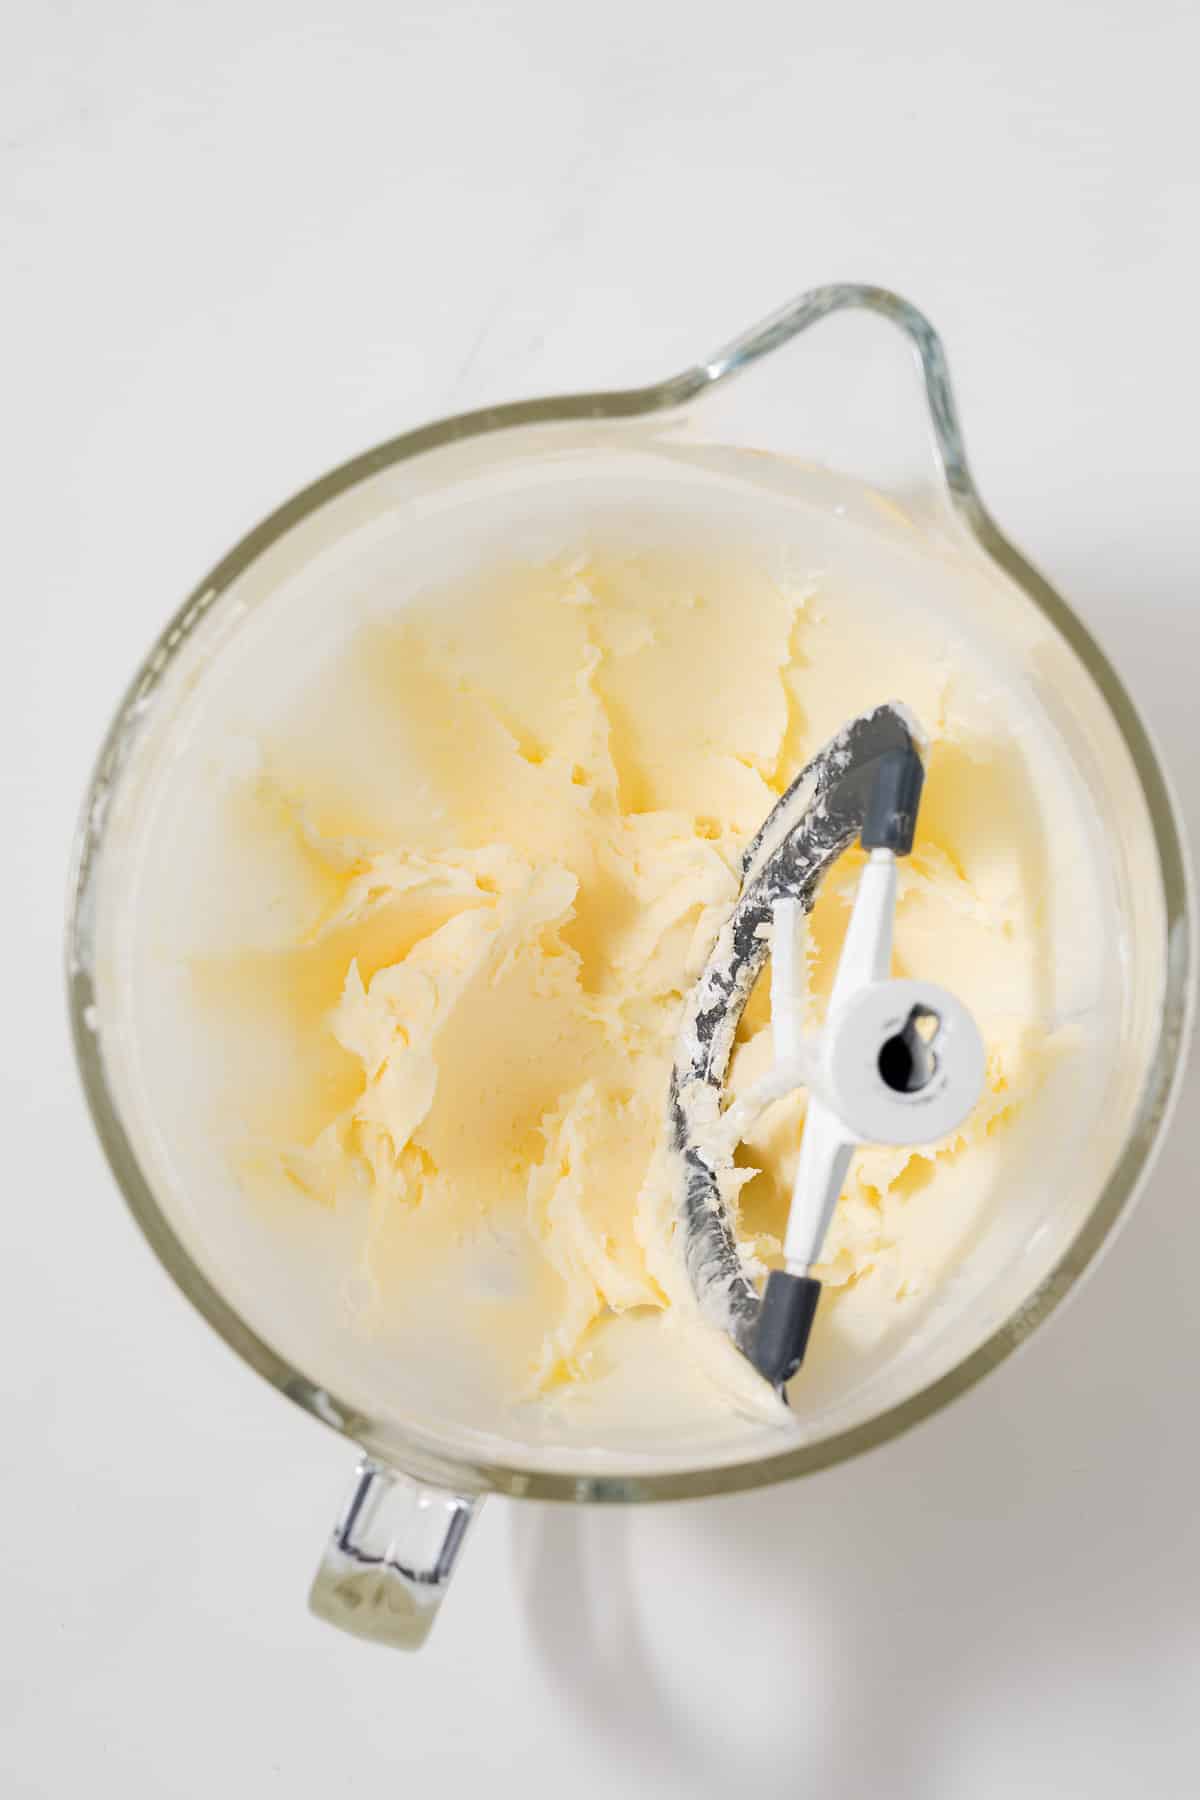 Butter creamed in glass bowl.